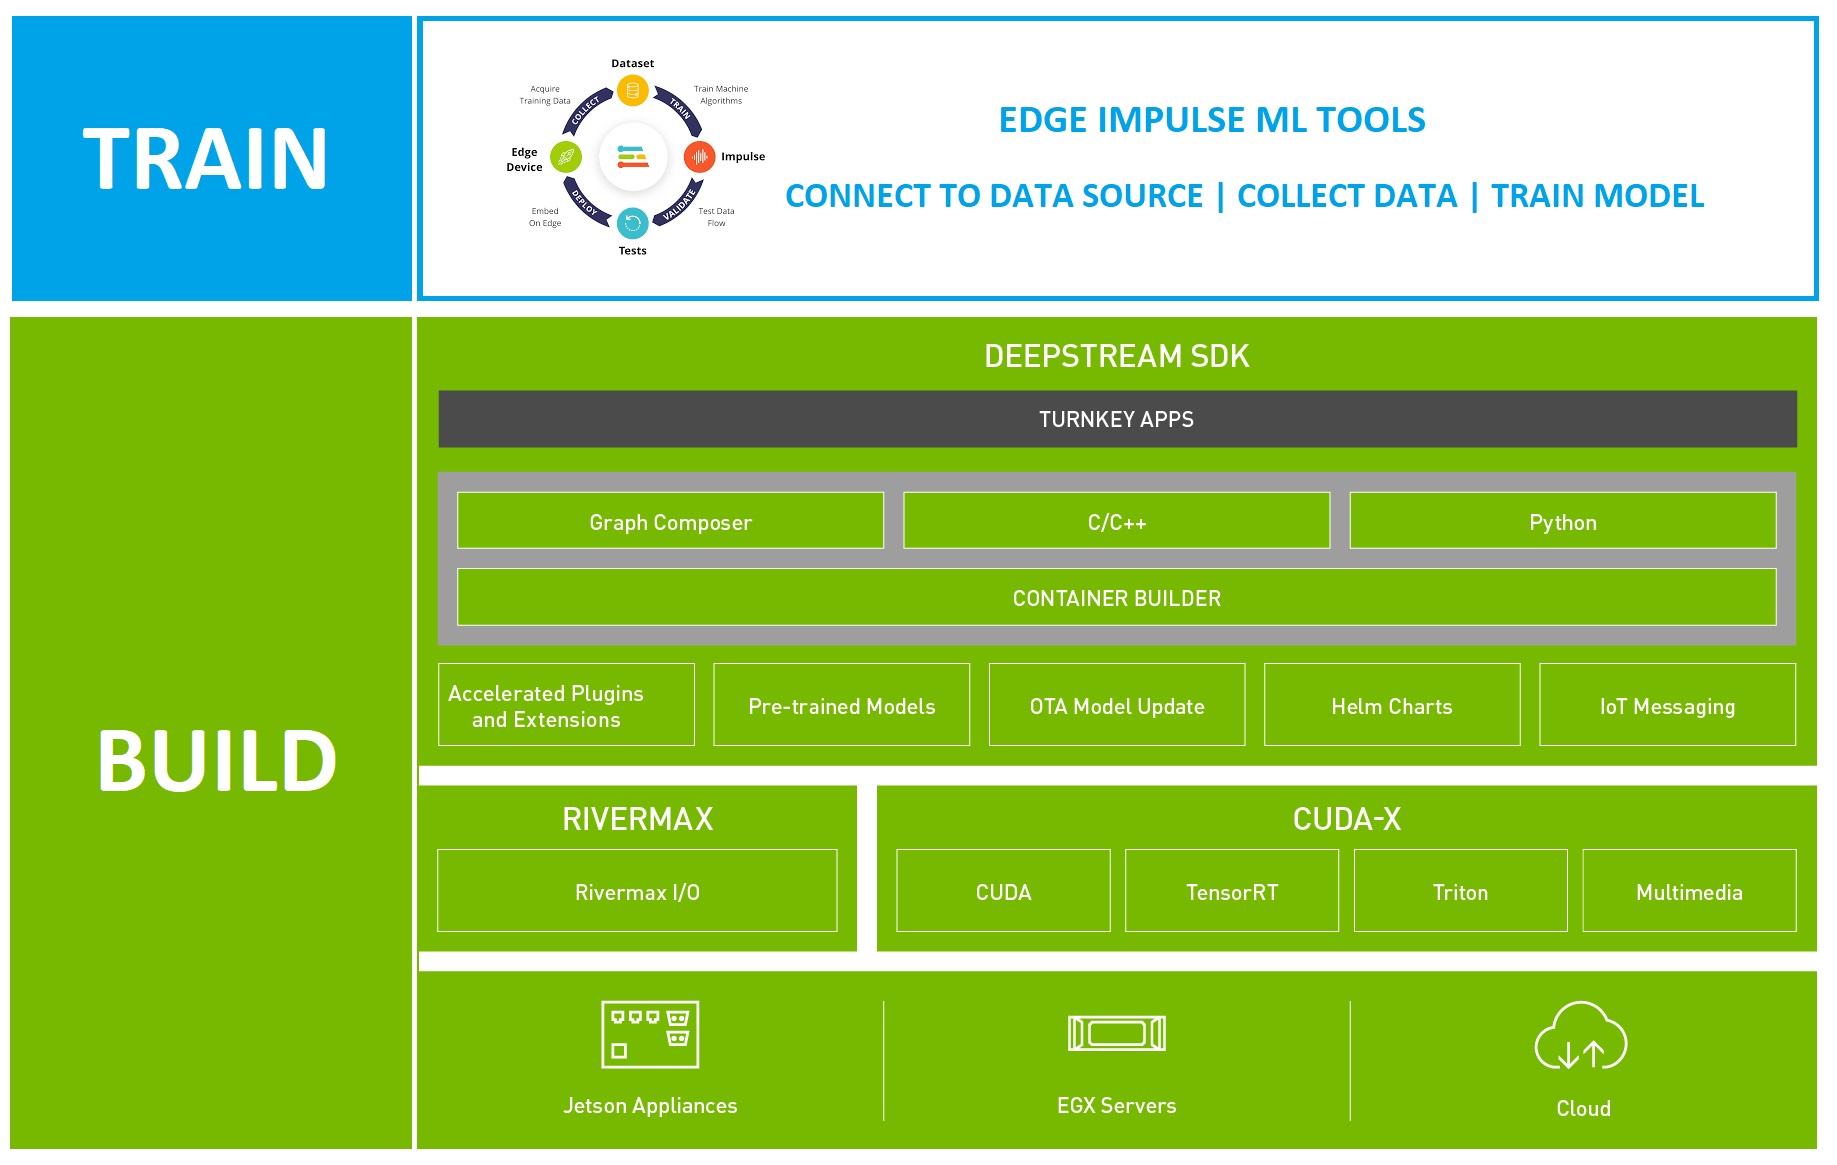 Edge Impulse ML tools are at the top of the stack and used for training. The bottom half of the stack is for building models and consists of Python and C/C++ at the top, followed by Deepstream SDK, CUDA-X, and the NVIDIA computing platform as the foundation. 
